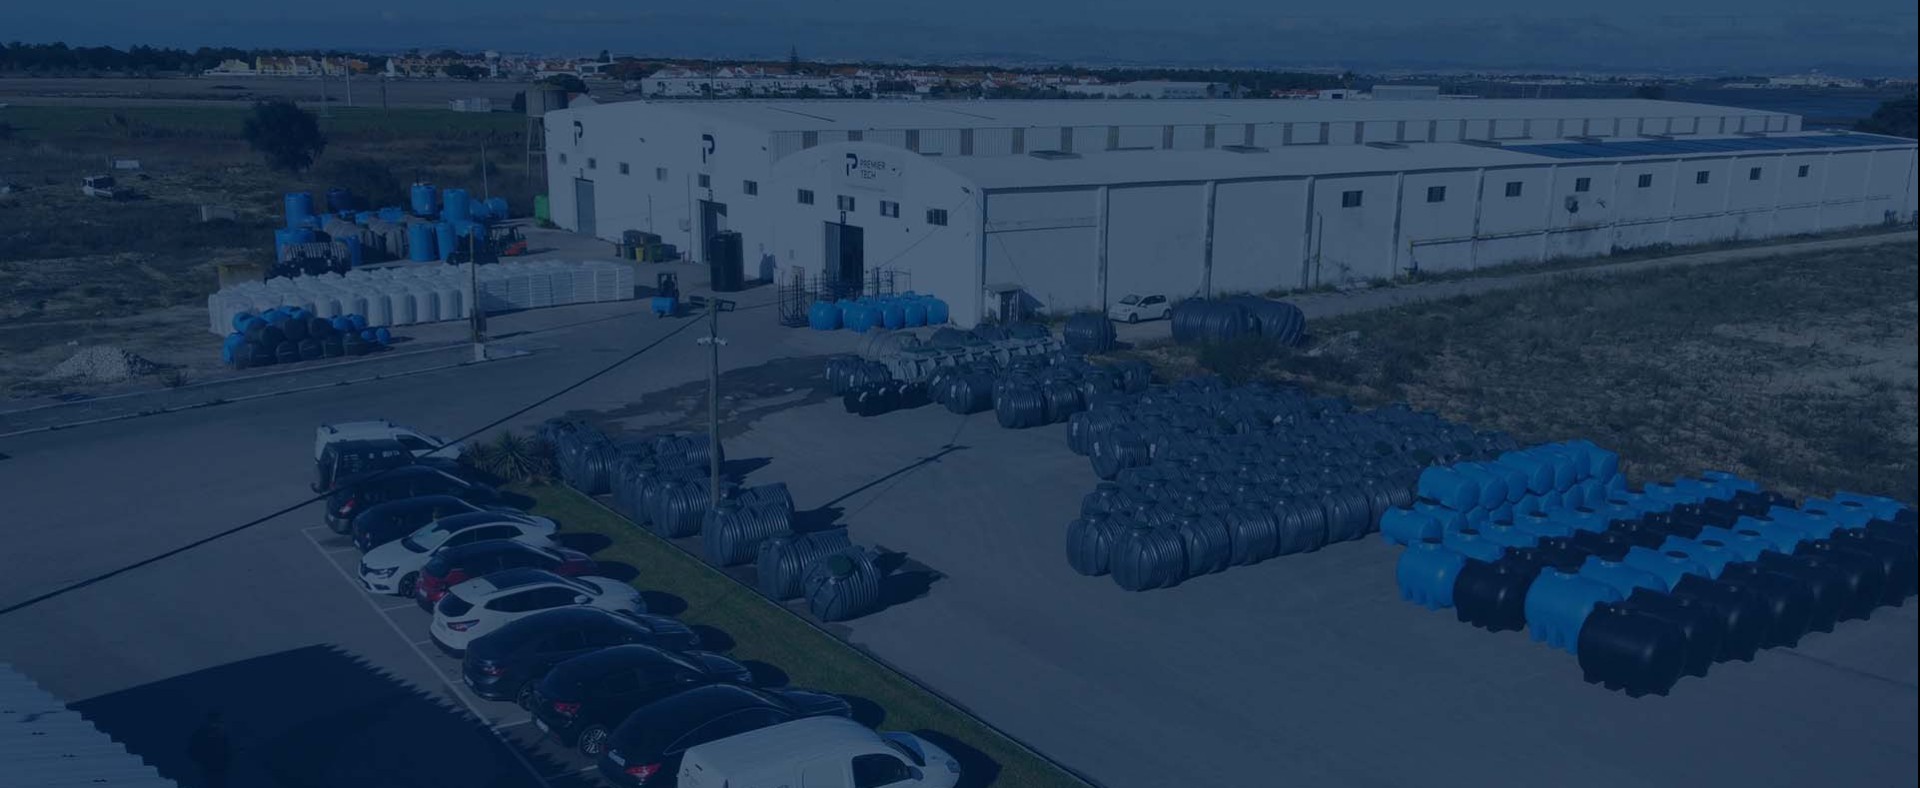 Premier Tech Water and Environment factory in Montijo, Portugal, for liquid storage, wastewater treatment, and rainwater harvesting systems.